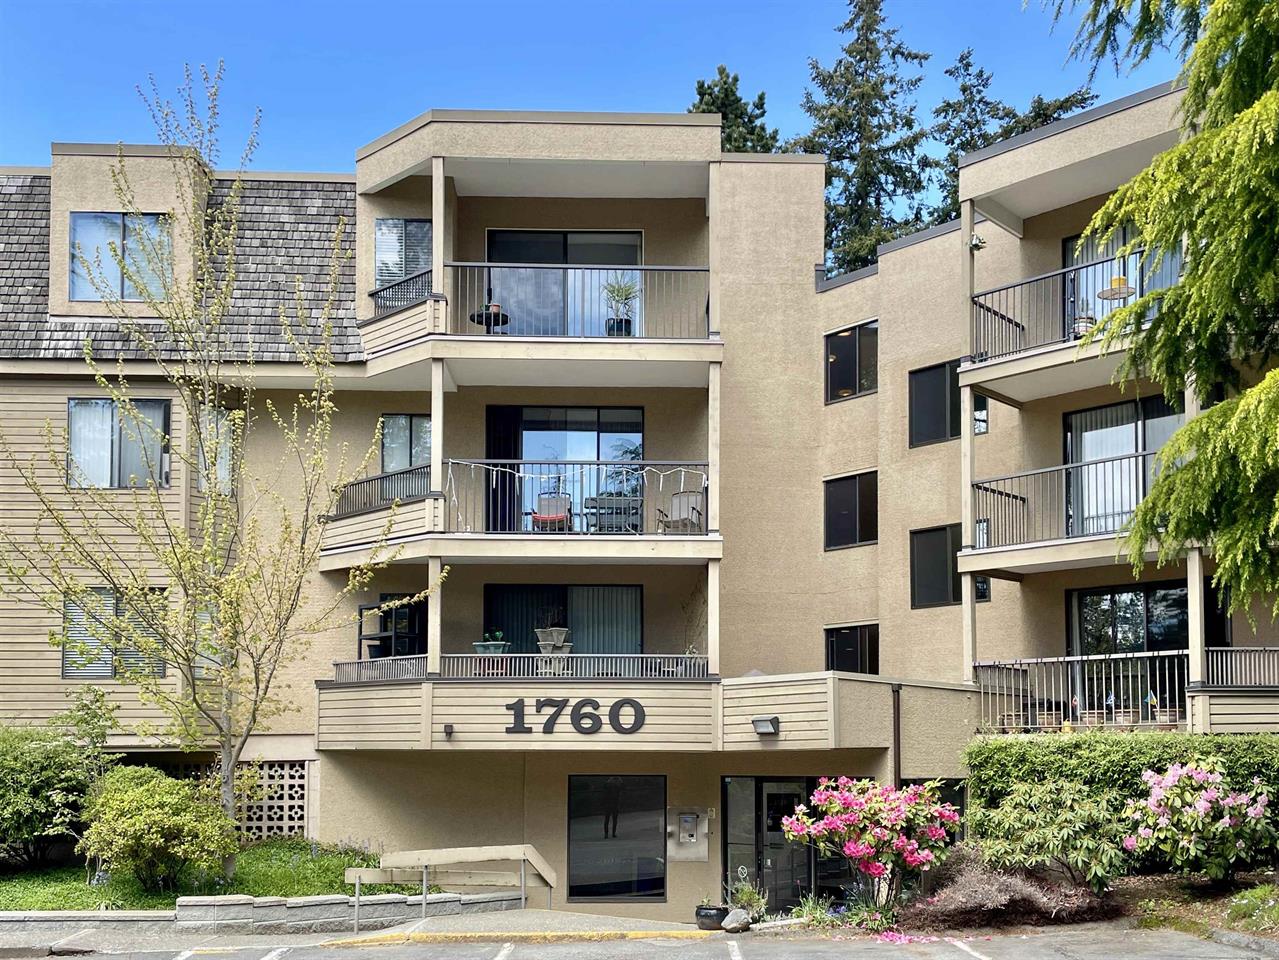 2 bedroom Penthouse facing the Park in South Surrey